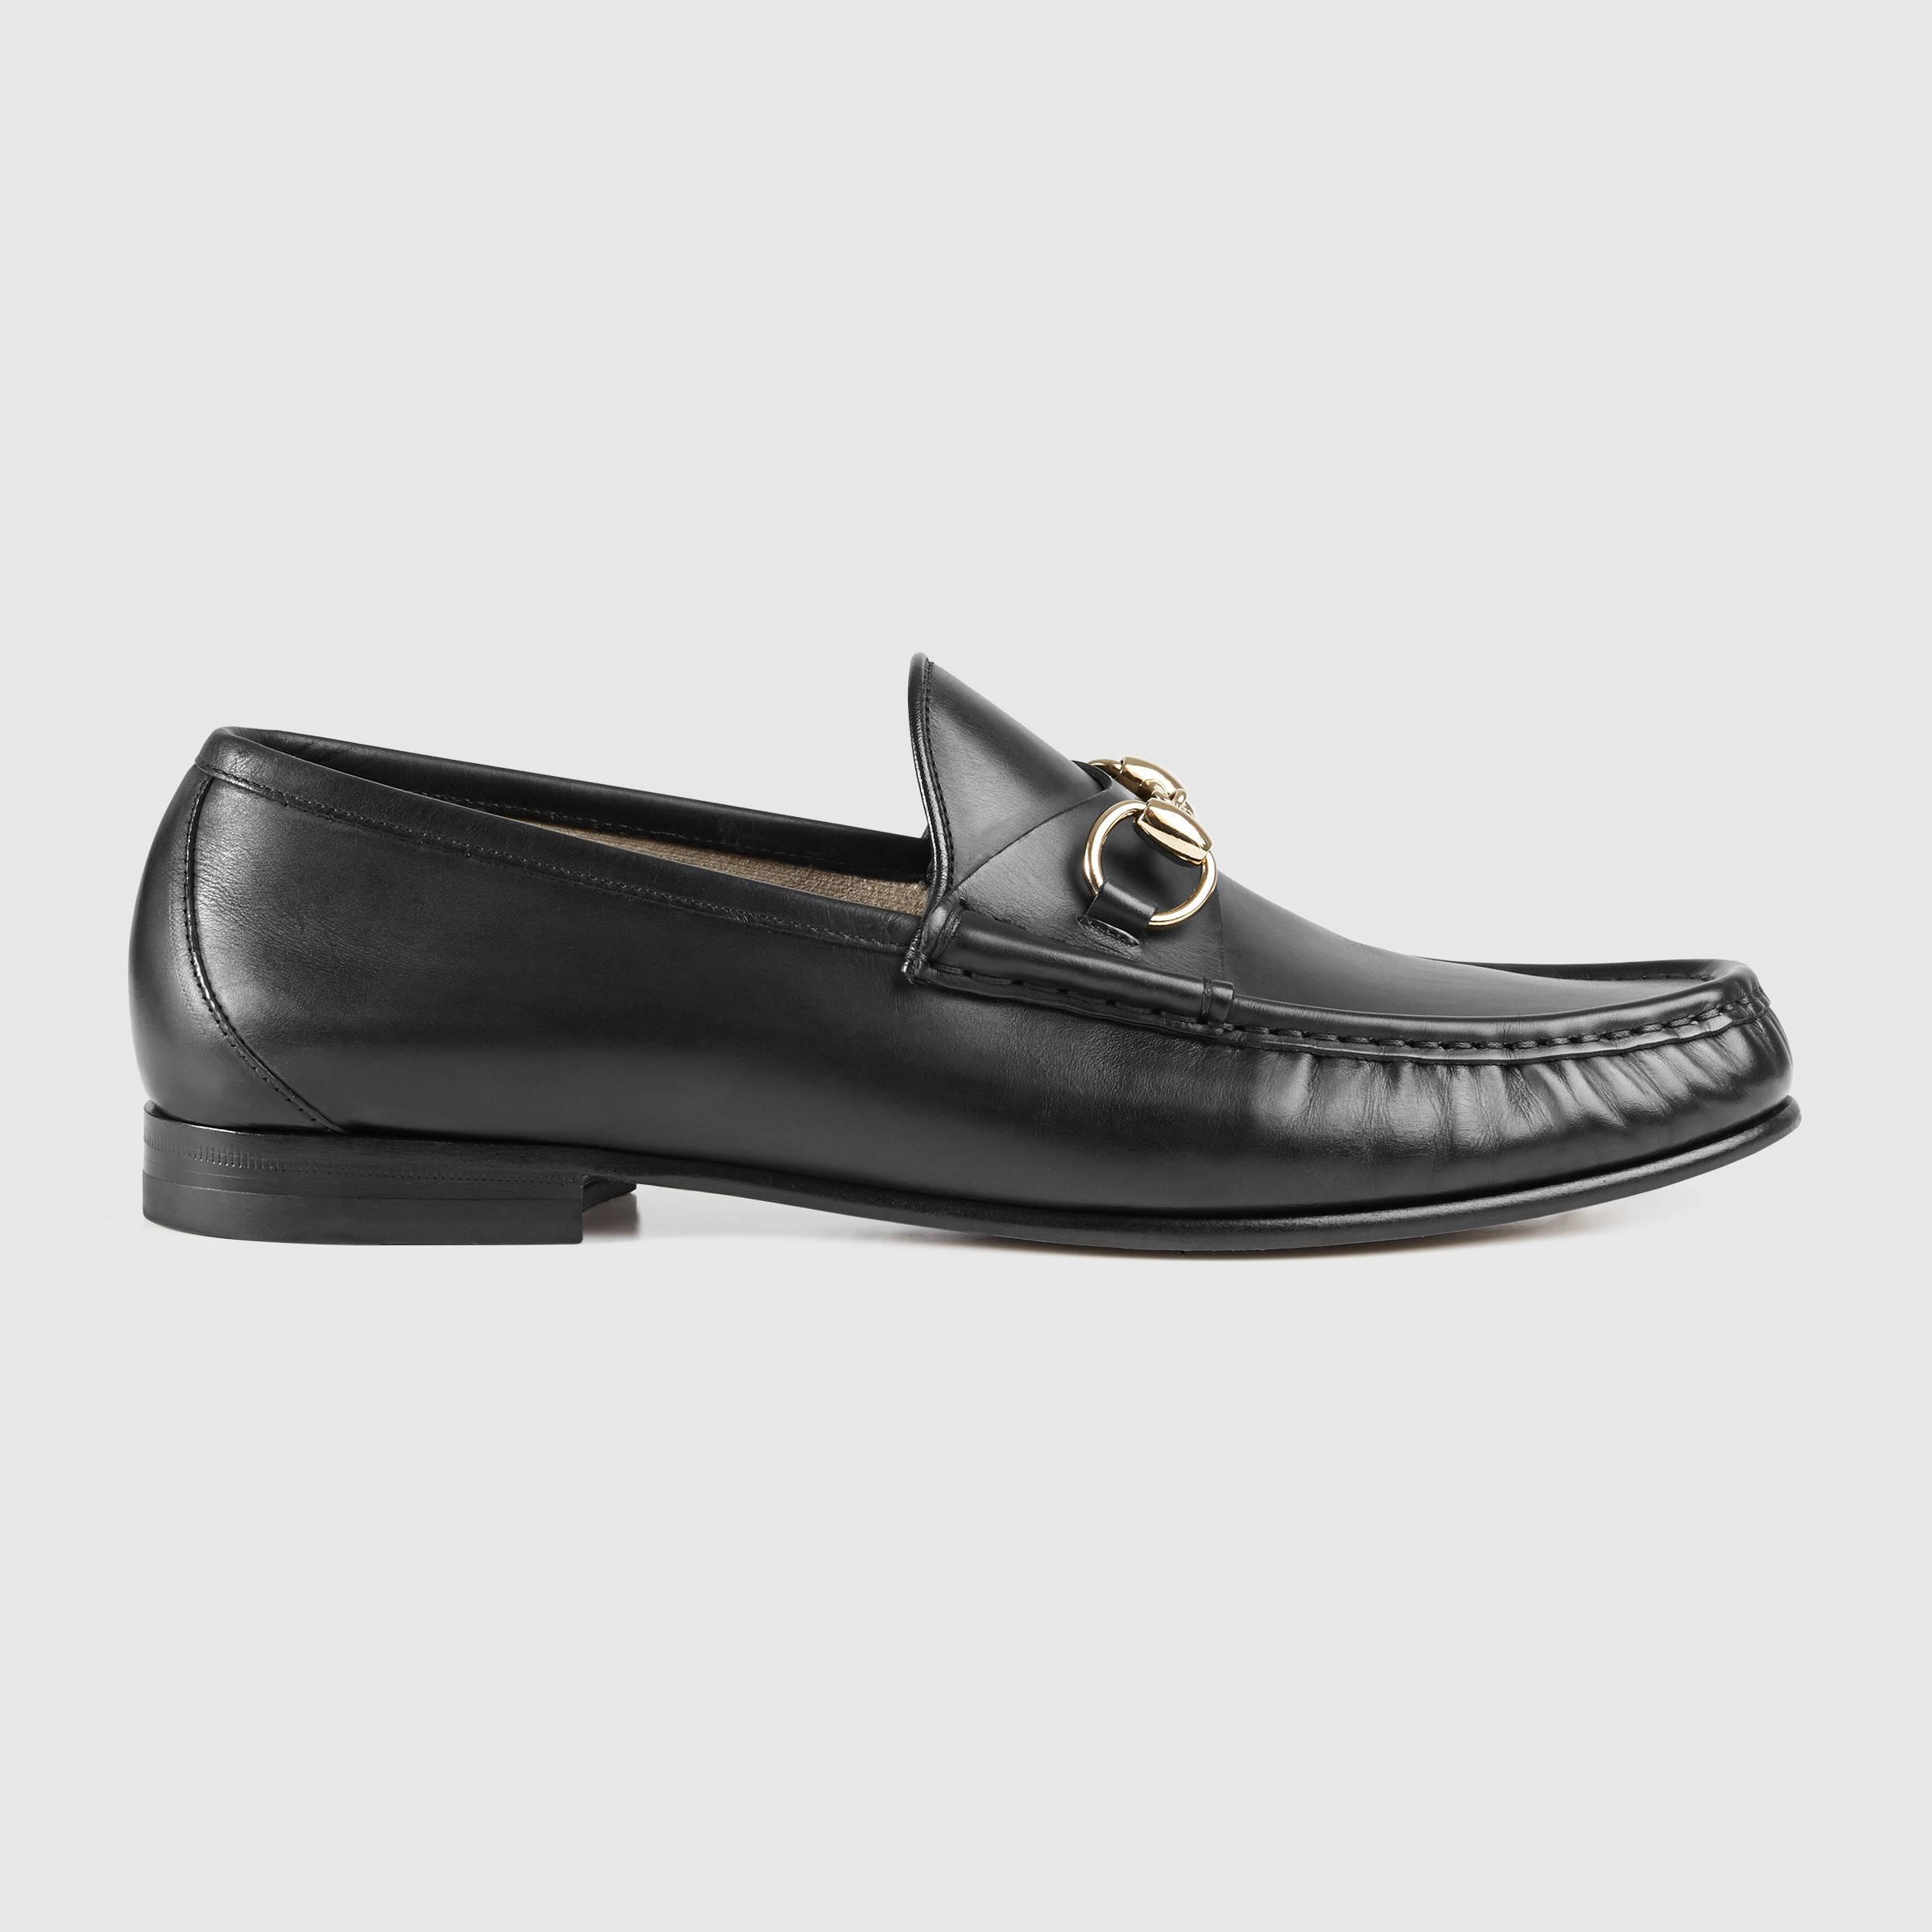 Lyst - Gucci 1953 Horsebit Loafer In Shaded Leather in Black for Men